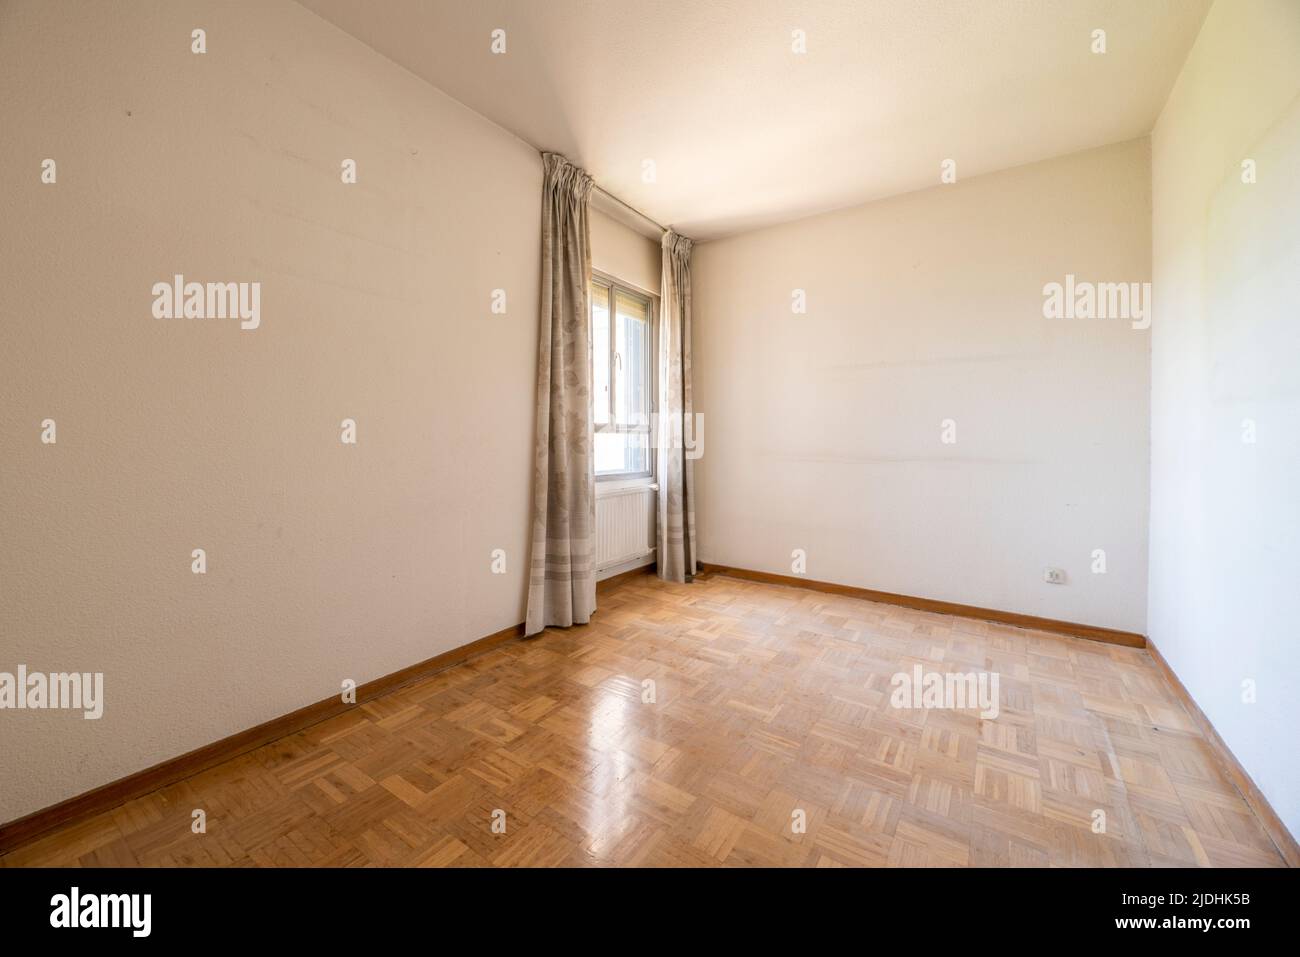 Empty room with oak parquet floor and woodwork and window with curtains Stock Photo